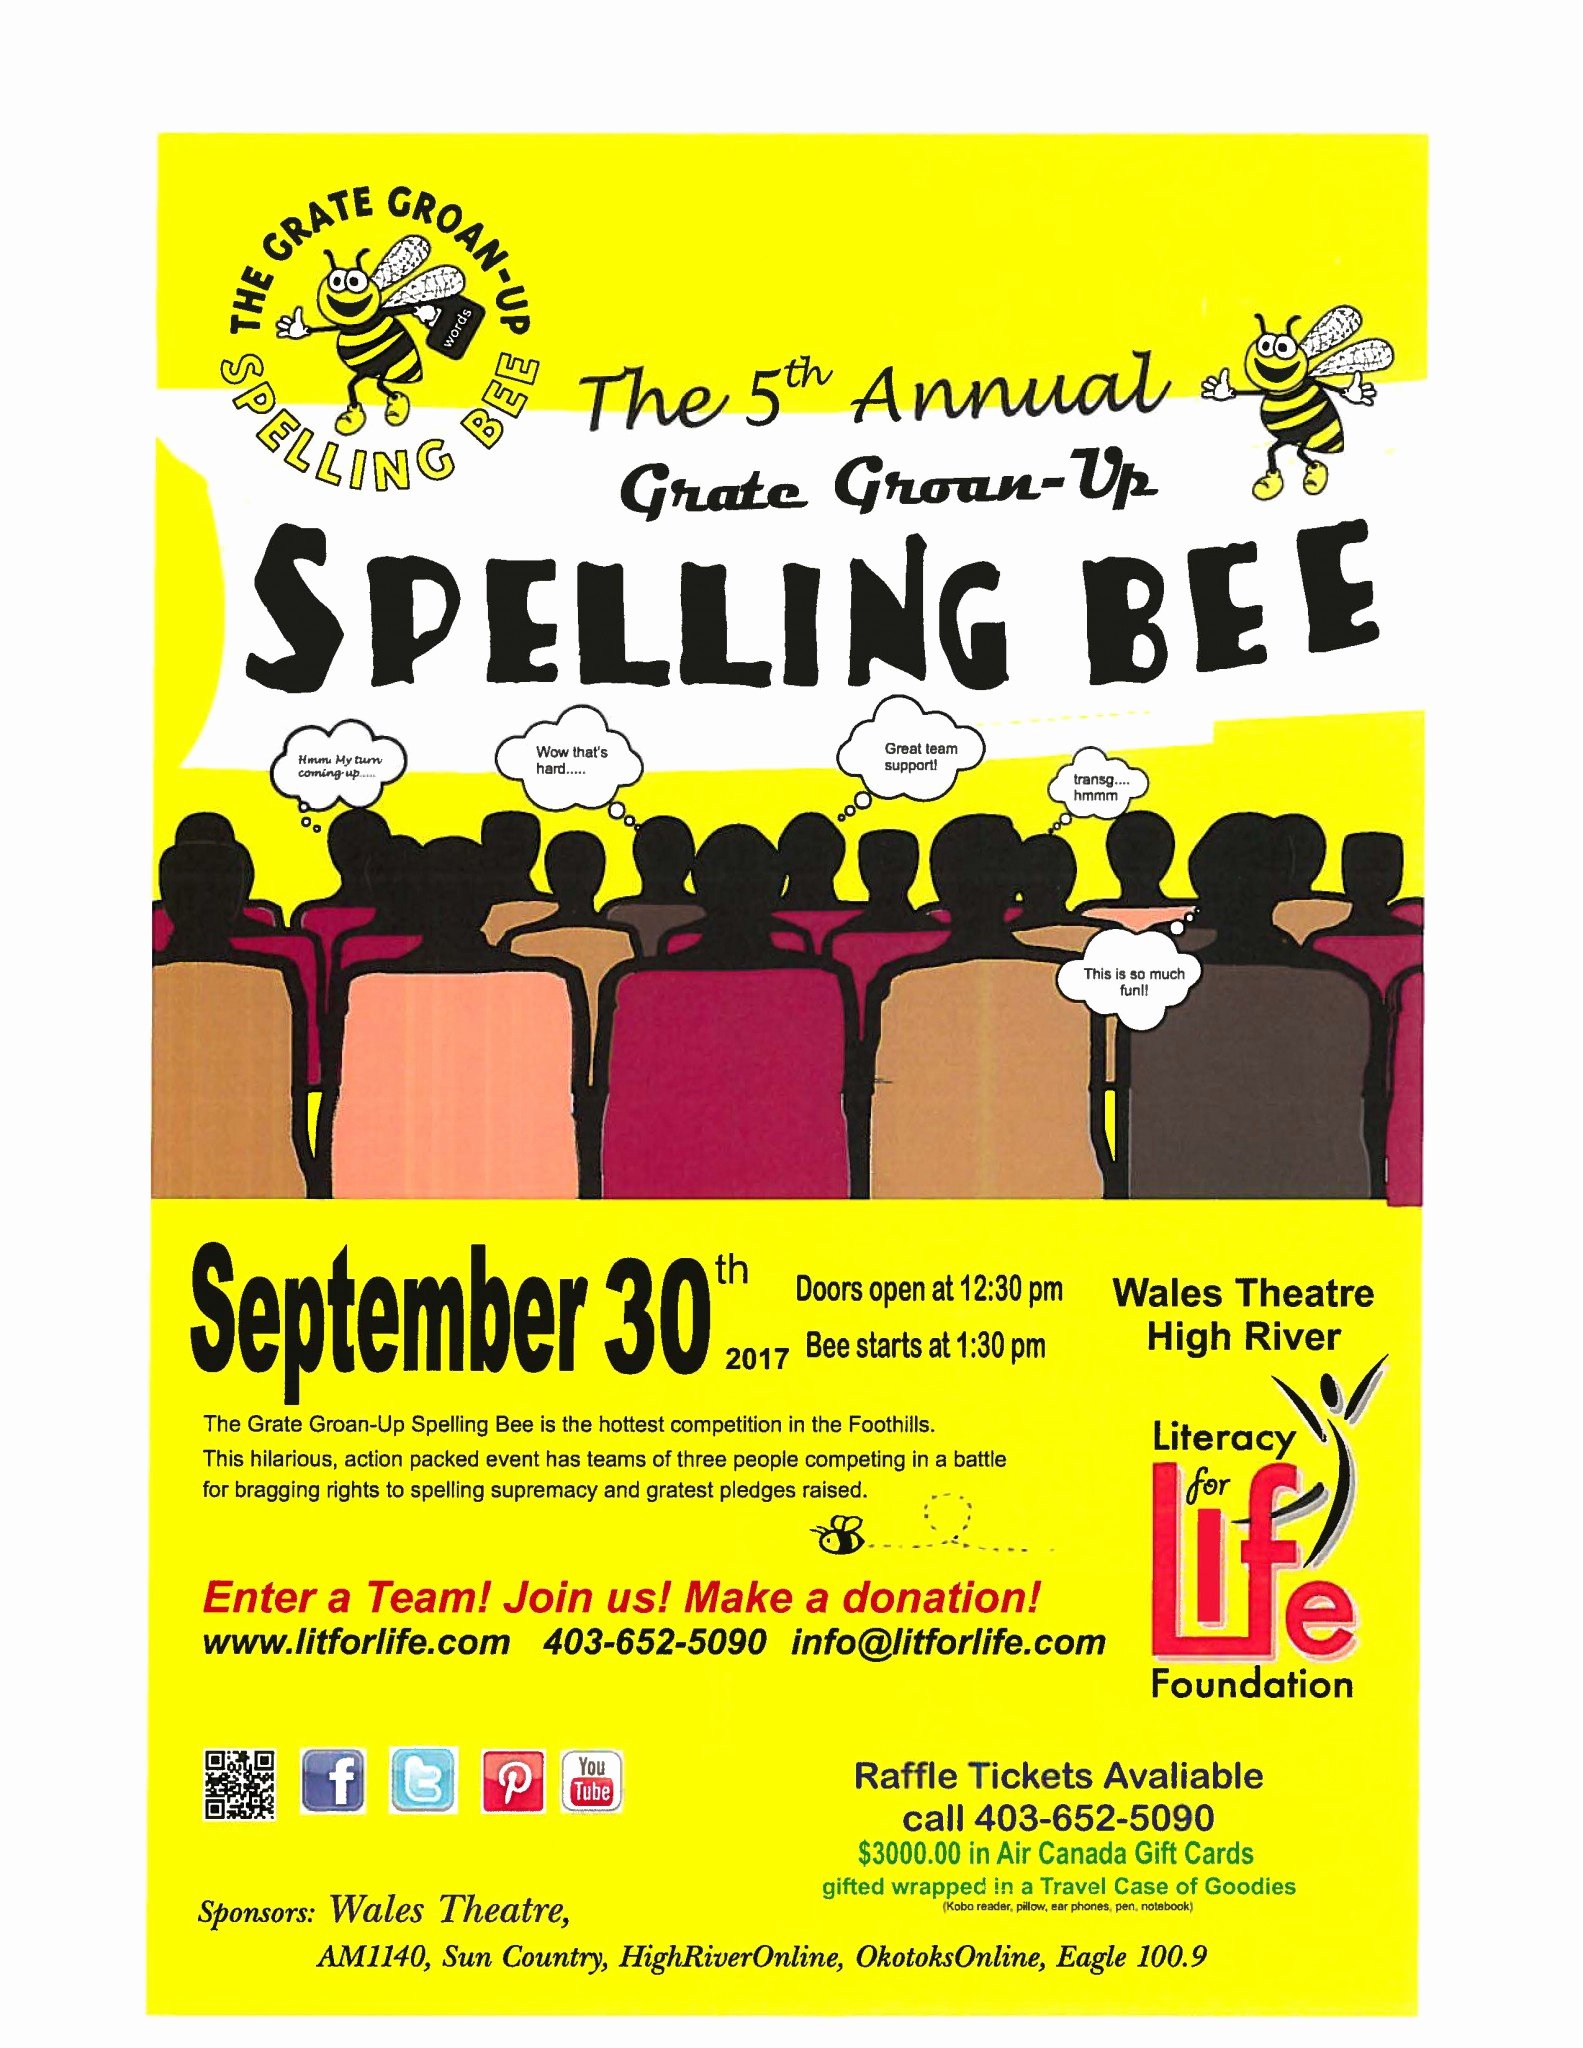 Spelling Bee Poster Ideas Inspirational Grate Groan Up Spelling Bee